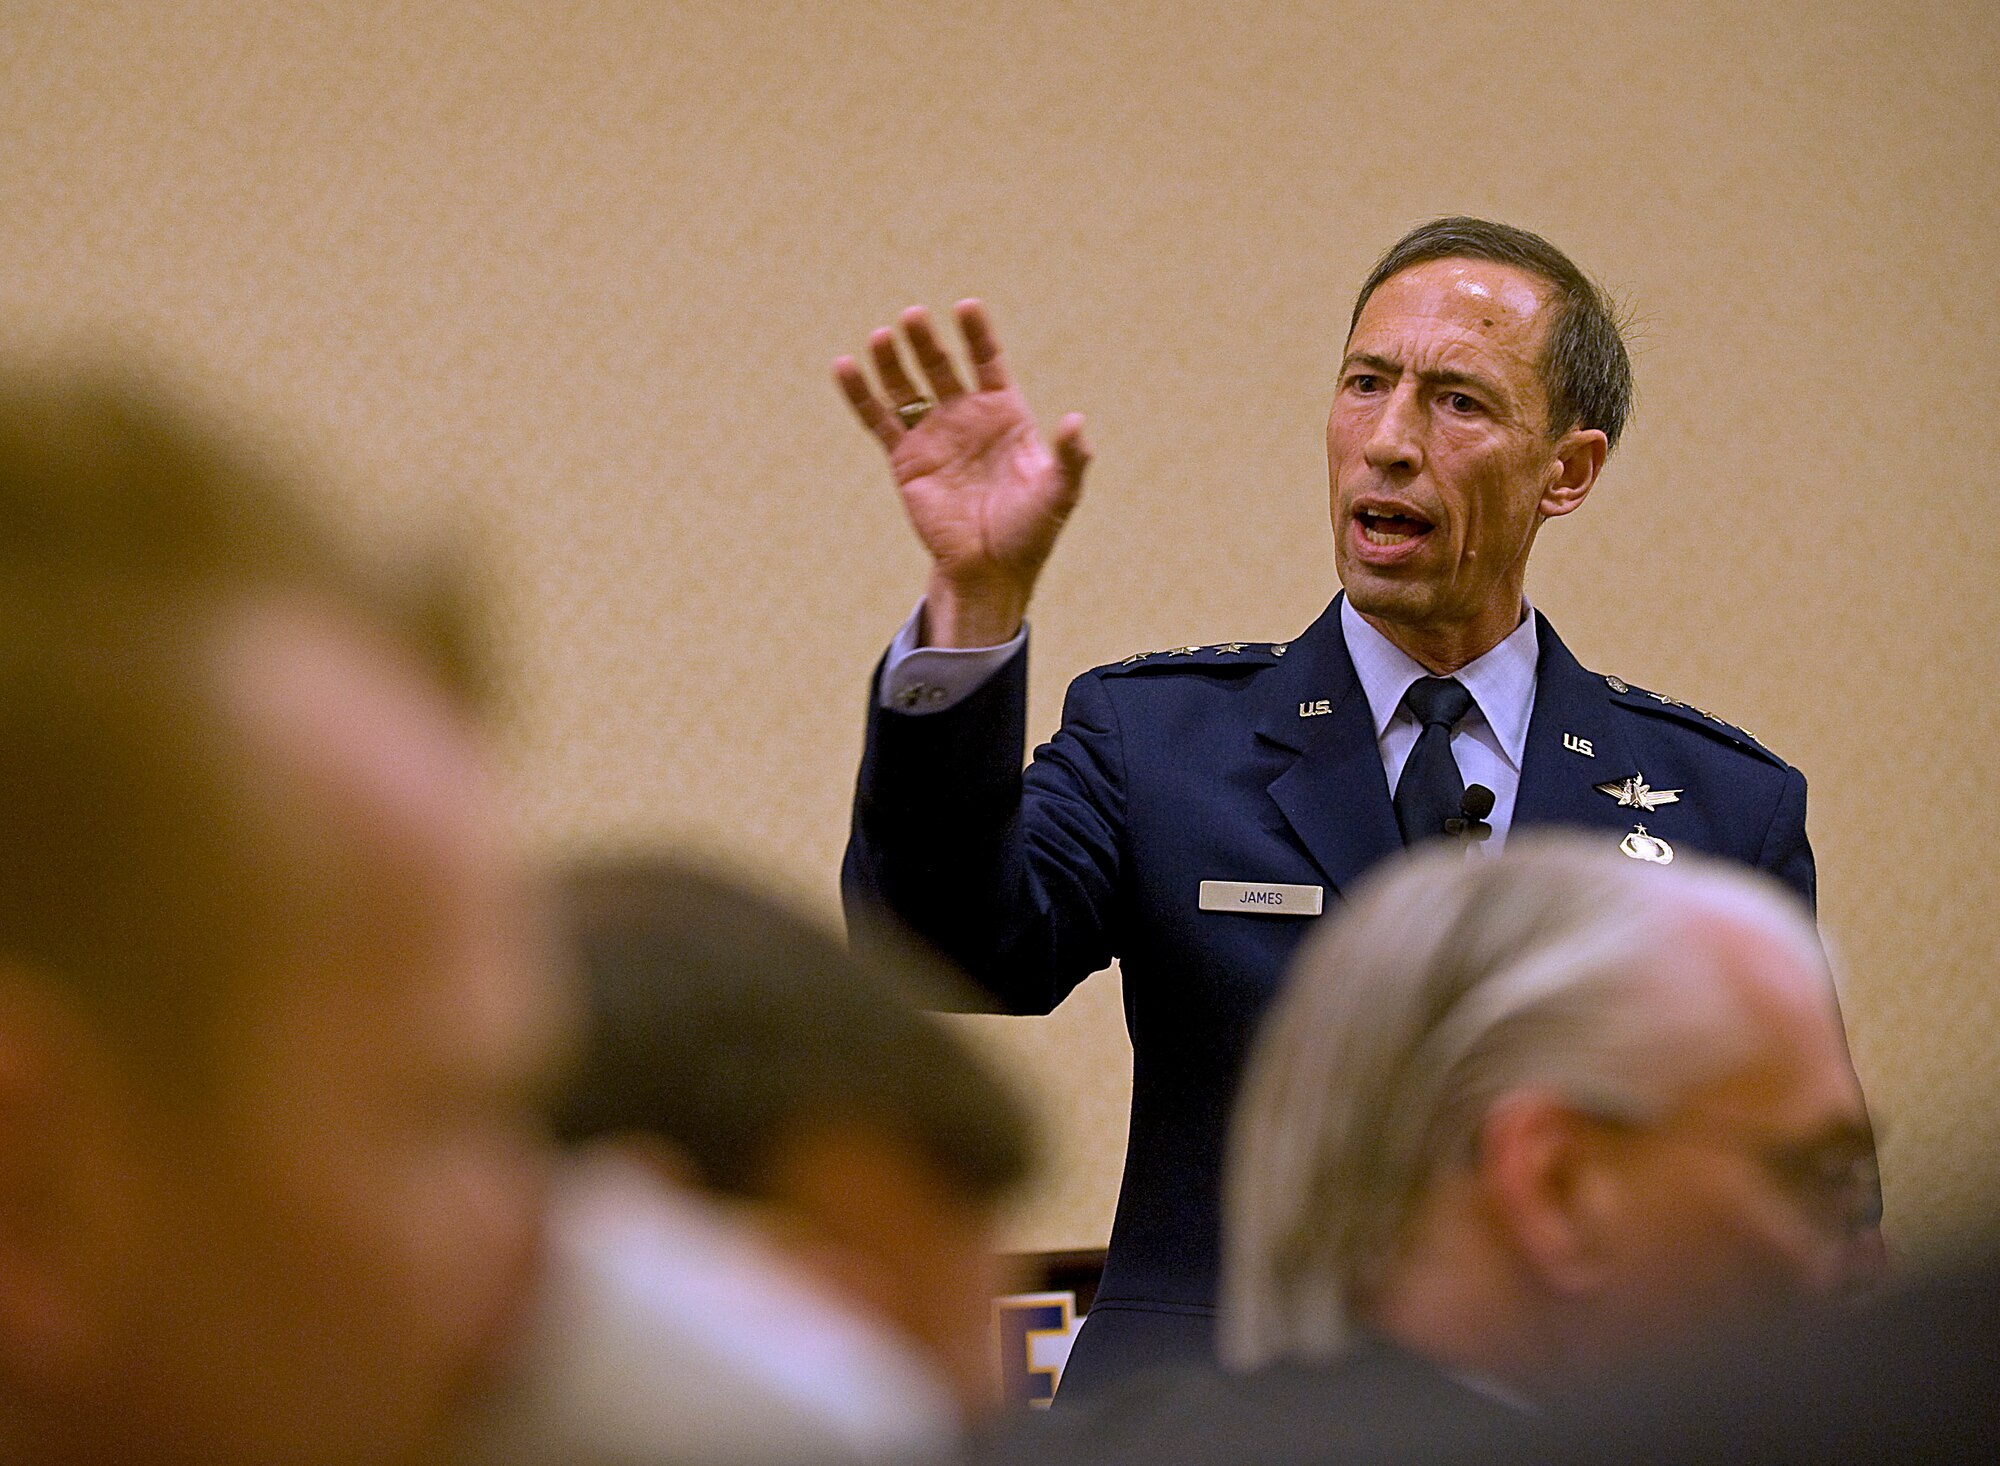 Lt. Gen. Larry D. James speaks April 26, 2012, during the Air Force Association breakfast at the Crystal City Marriott, Va. The AFA breakfast program is a monthly series that provides a venue for senior Air Force and DOD leaders to communicate directly with the public and the press. James is the deputy chief of staff for ISR at Headquarters Air Force. (U.S. Air Force photo/Staff Sgt. Tiffany Trojca) 